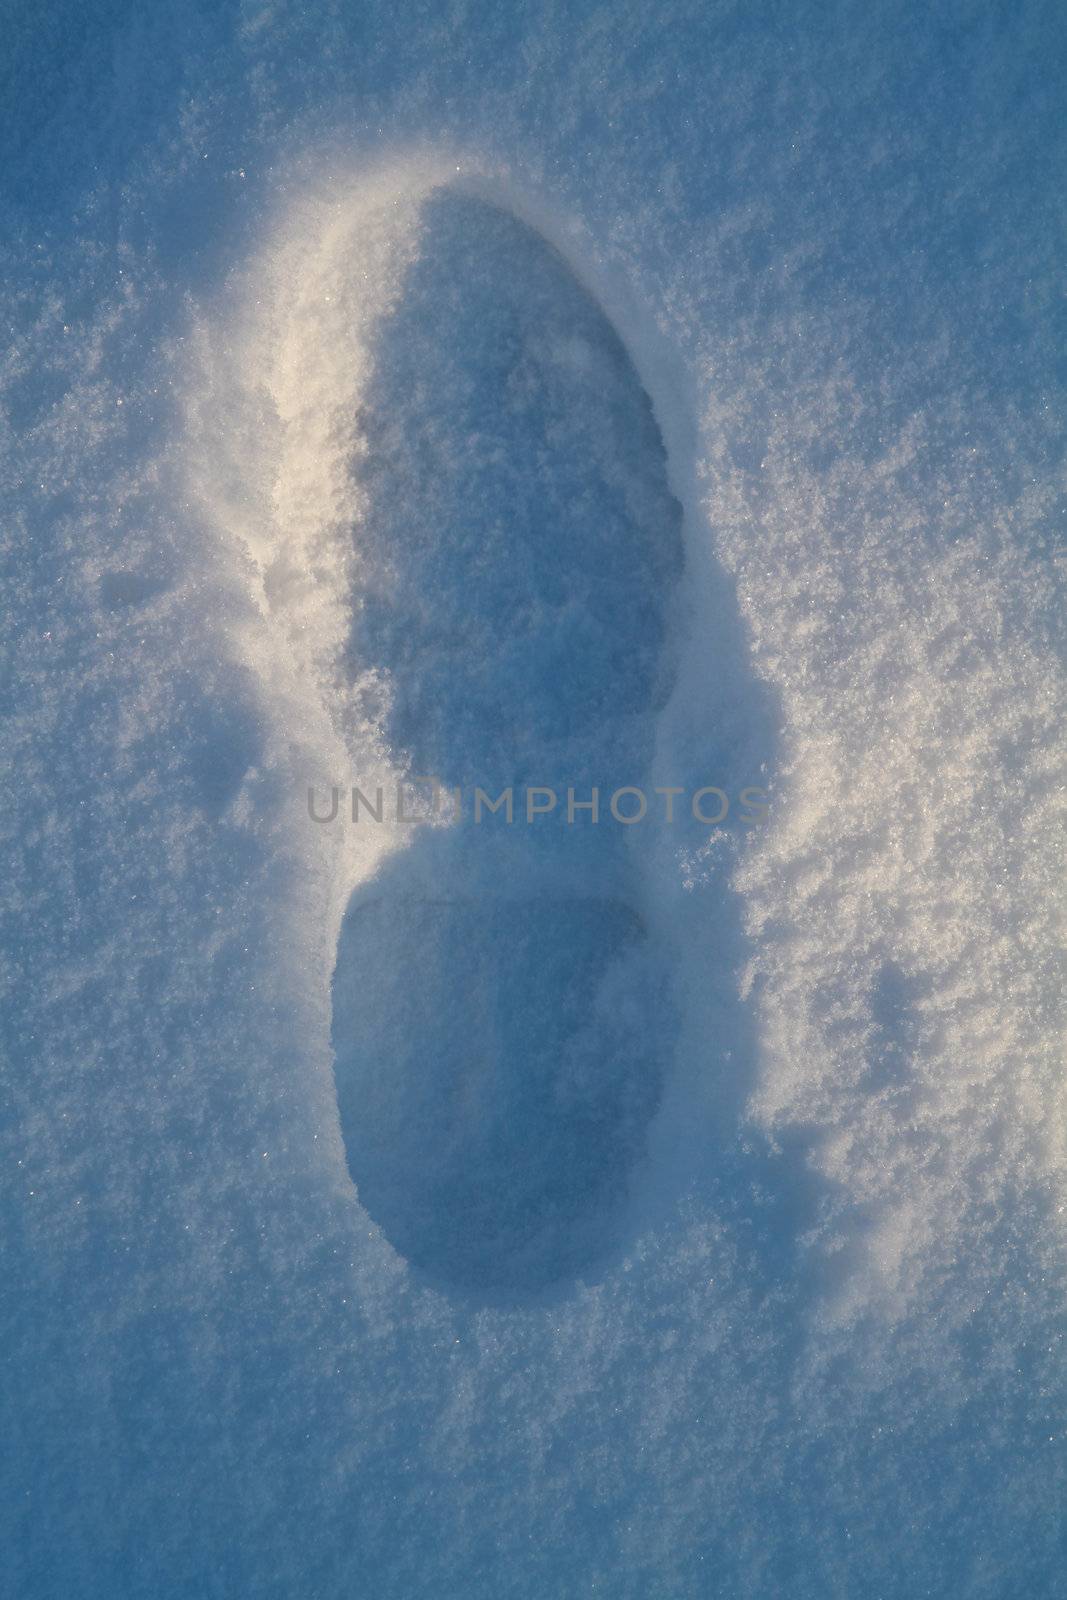 A single footprint in fresh and cold snow.